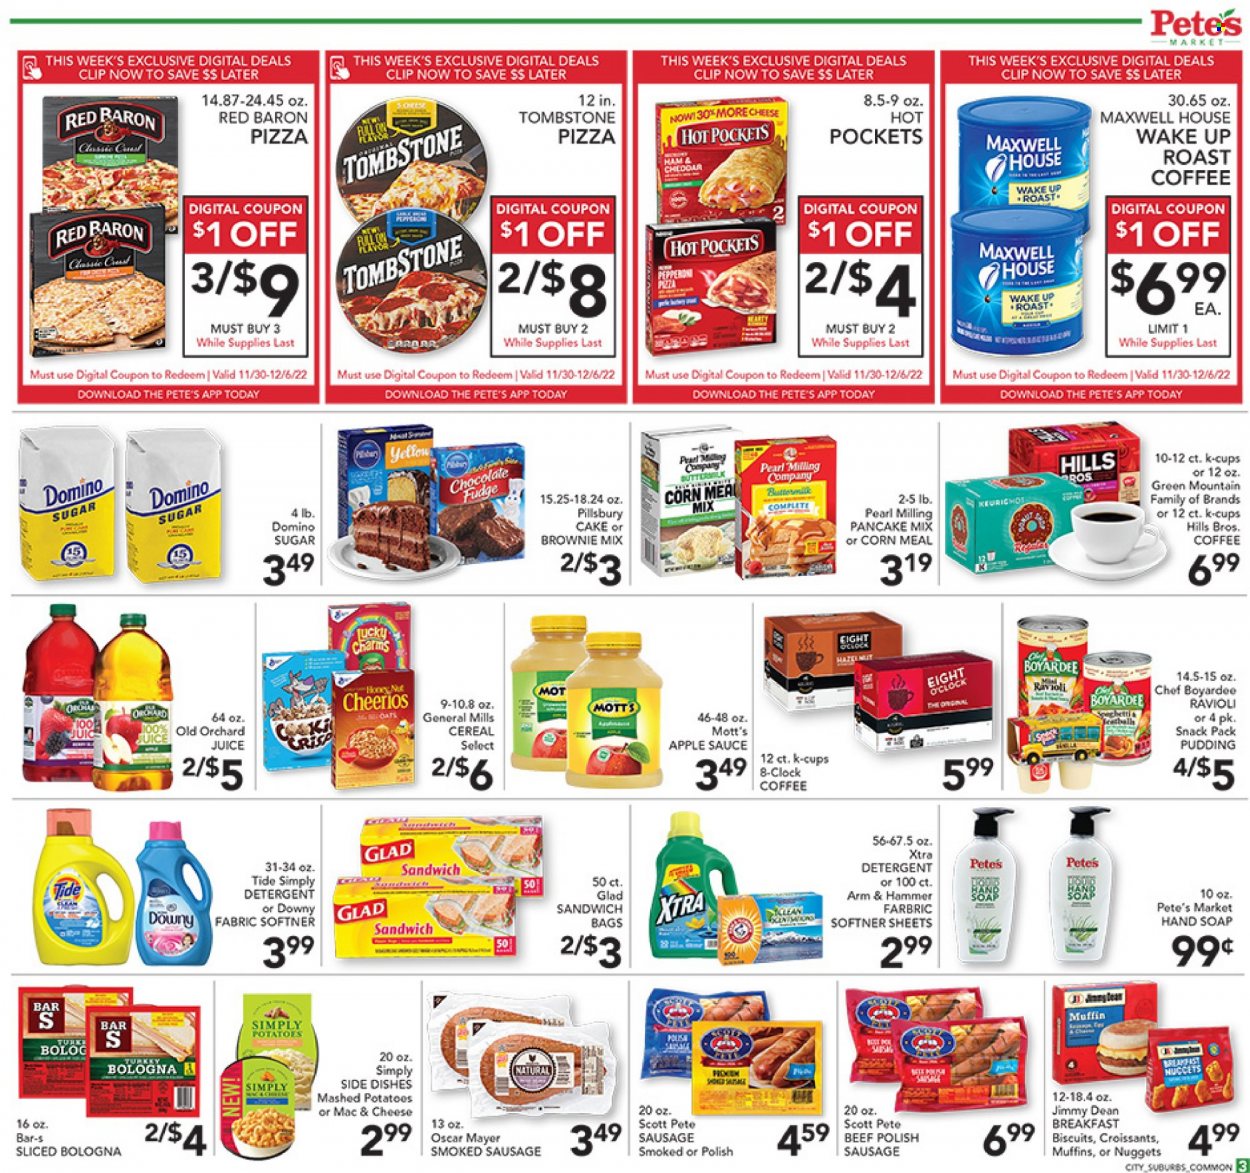 thumbnail - Pete's Fresh Market Flyer - 11/30/2022 - 12/06/2022 - Sales products - cake, muffin, brownie mix, corn, potatoes, Mott's, ravioli, hot pocket, pizza, nuggets, sauce, pancakes, Pillsbury, Jimmy Dean, ham, Oscar Mayer, sausage, smoked sausage, polish sausage, pepperoni, pudding, buttermilk, Red Baron, fudge, chocolate, biscuit, ARM & HAMMER, sugar, Chef Boyardee, cereals, Cheerios, apple sauce, juice, Maxwell House, coffee, coffee capsules, K-Cups, Eight O'Clock, Green Mountain. Page 3.